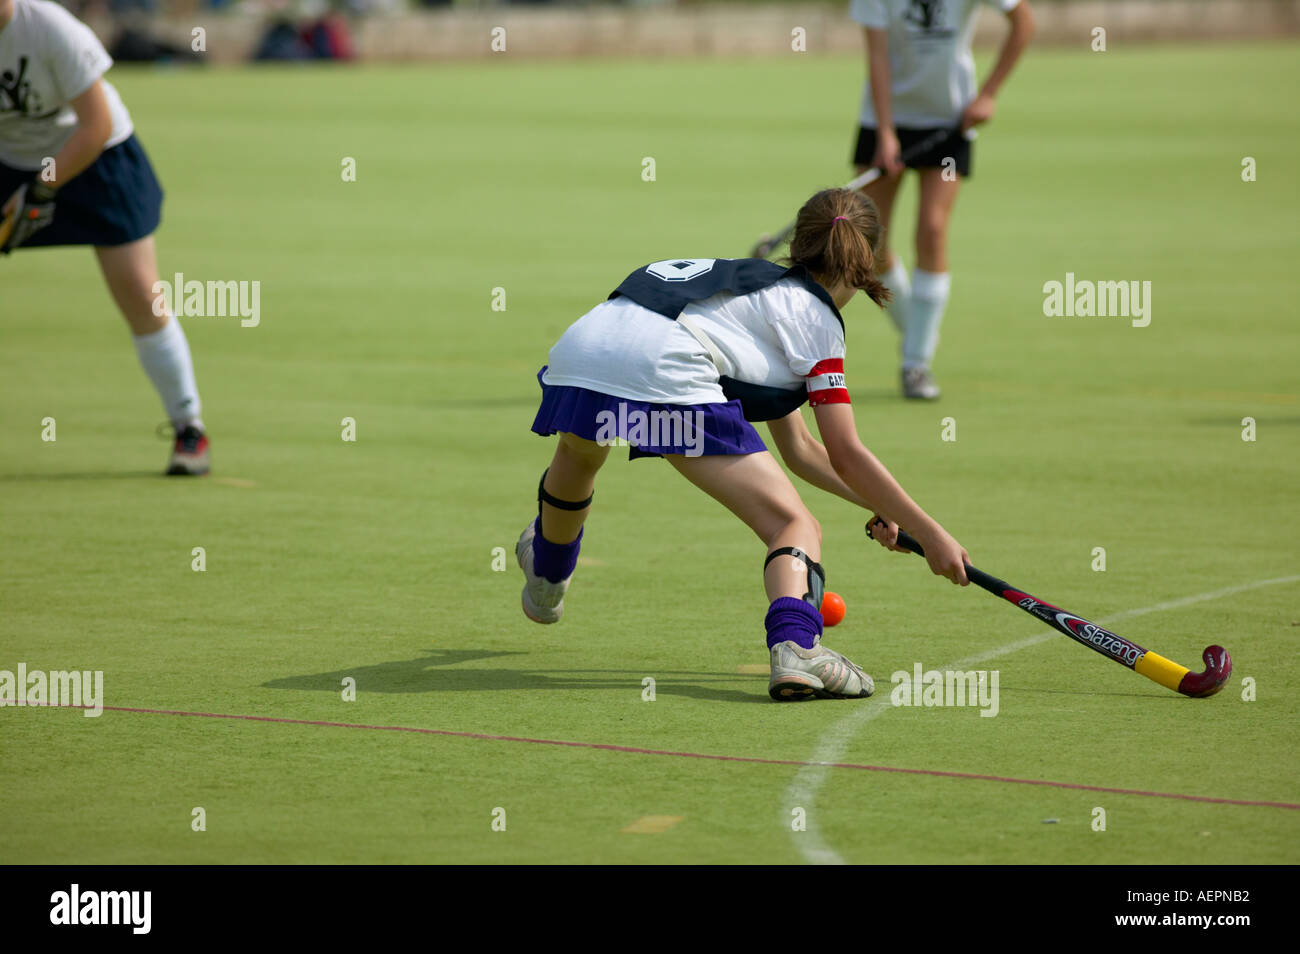 Striking the ball in a hockey match at a sports day event Stock Photo